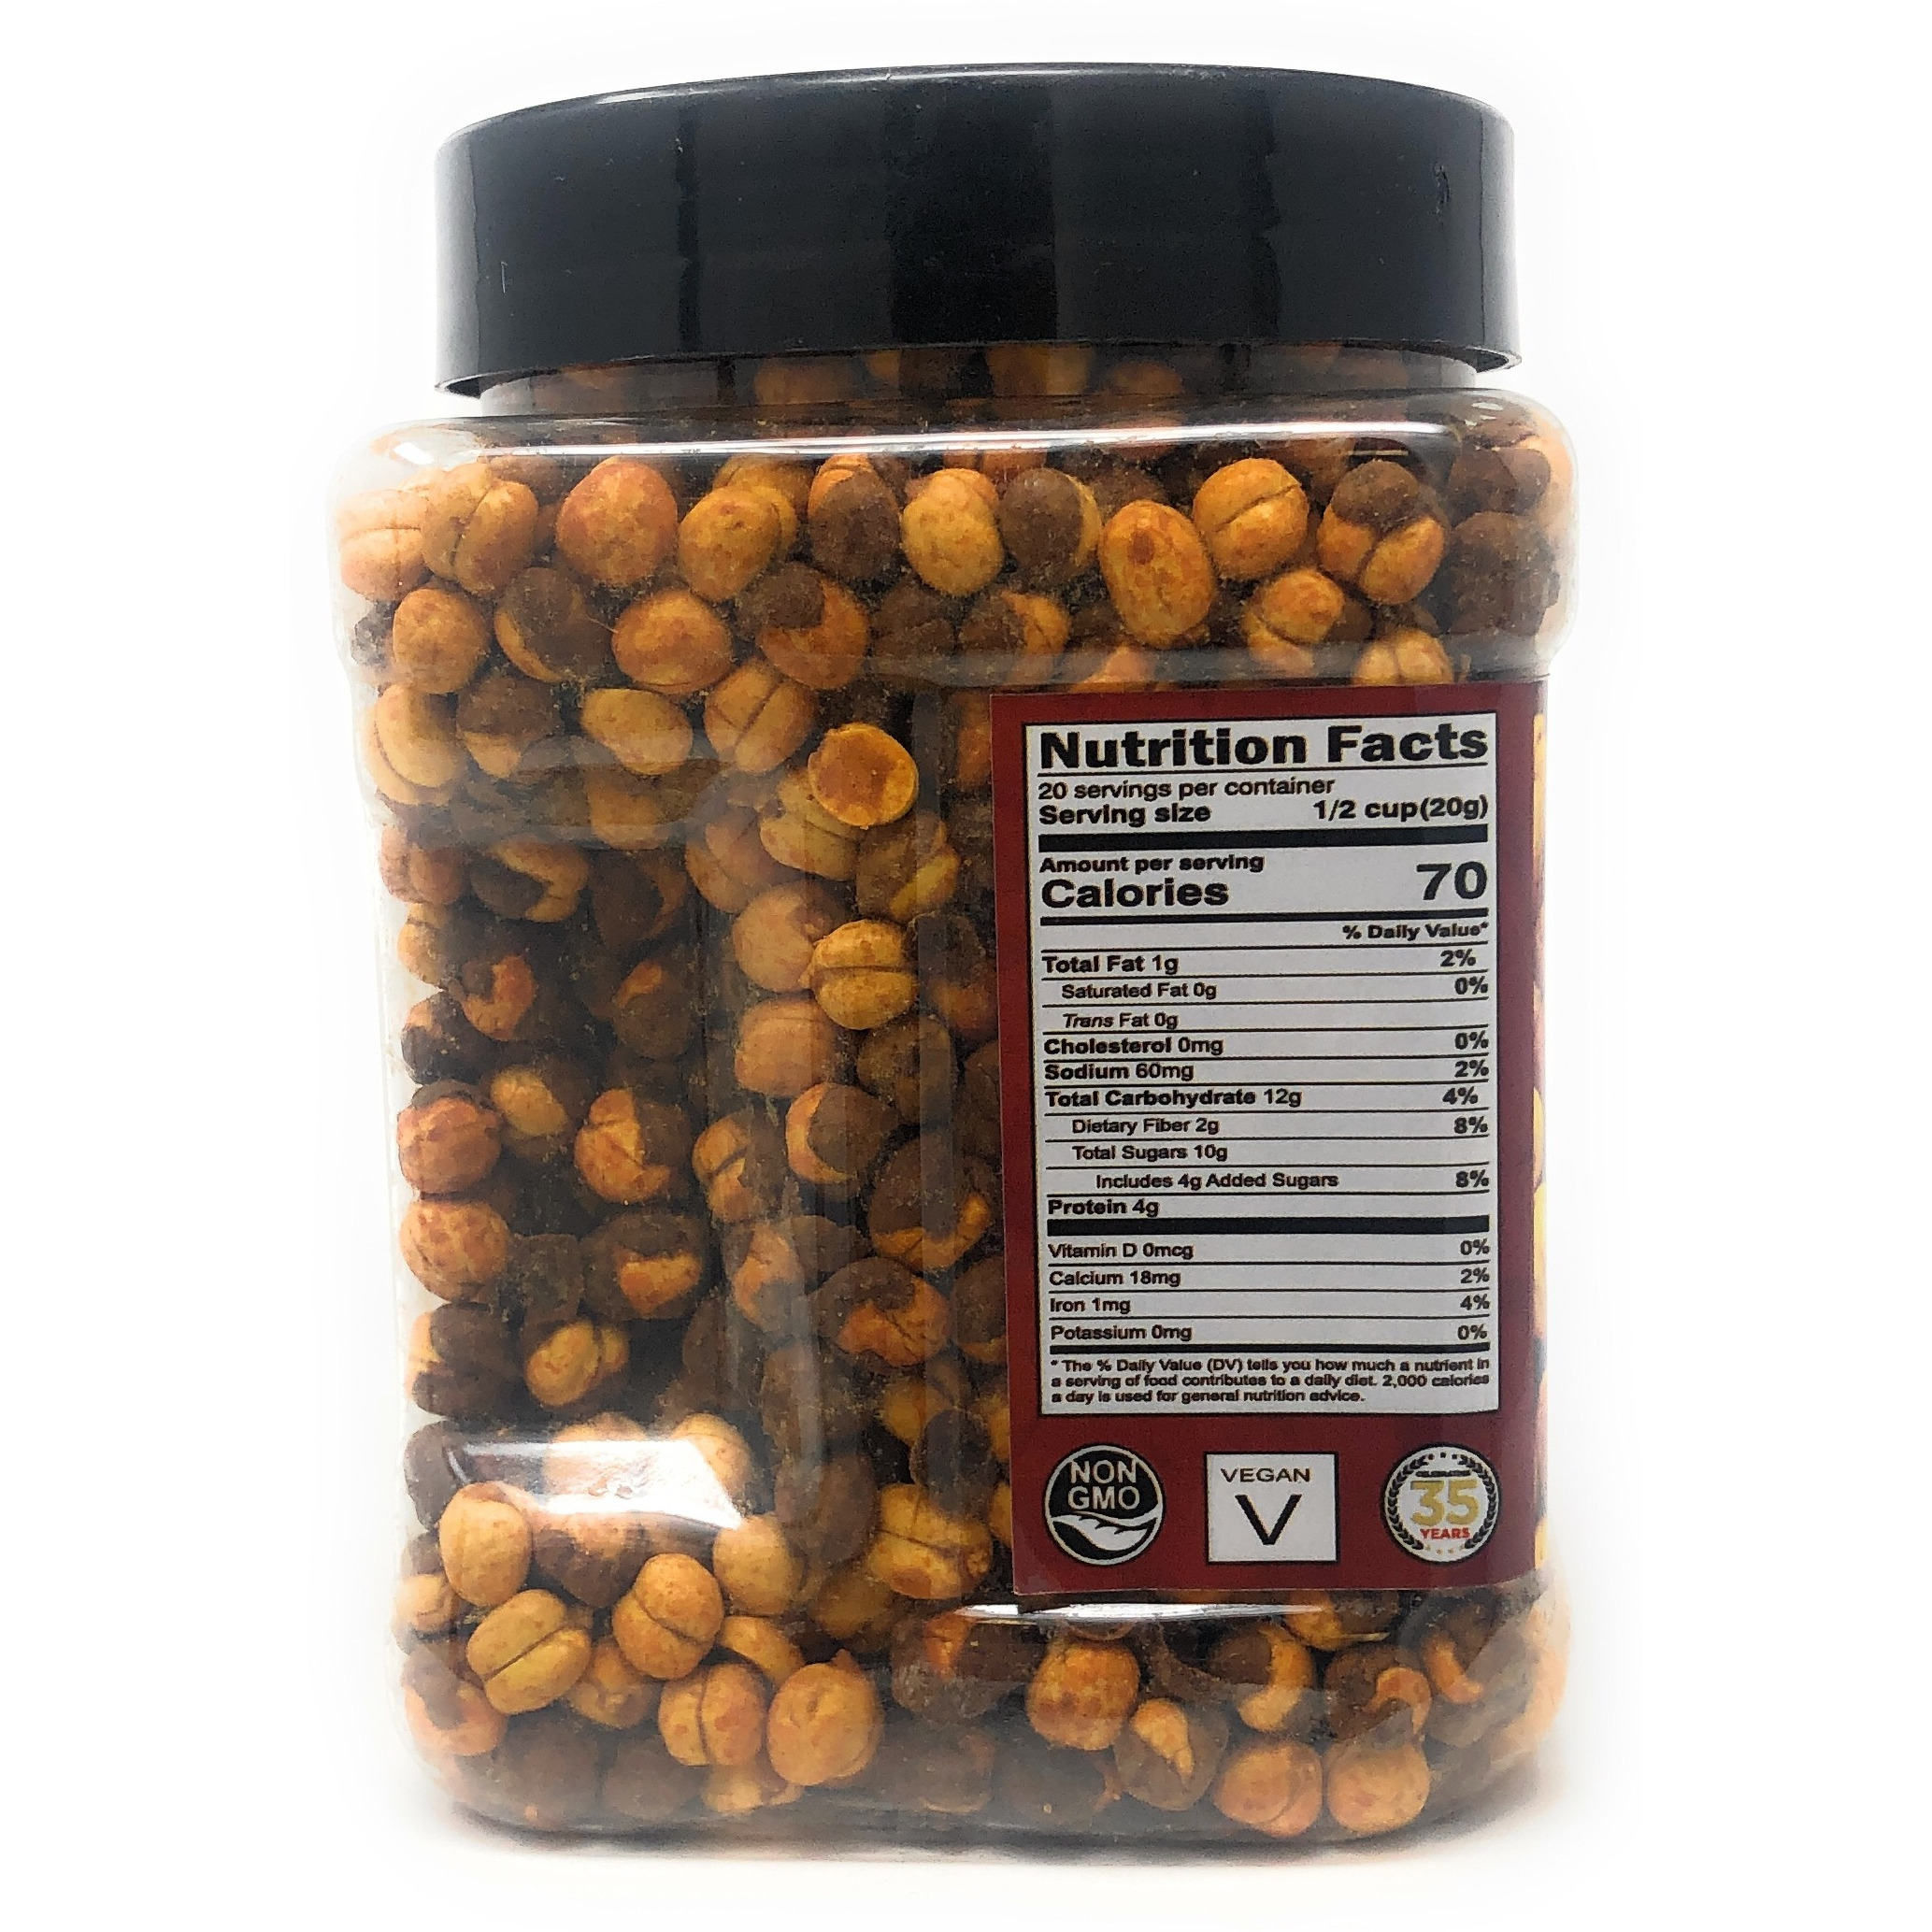 Rani Roasted Chana (Chickpeas) Chilli Garlic Flavor 14oz (400g) ~ All Natural | Vegan | No Preservatives | No Colors | Great Snack, Ready to Eat, Seasoned with 6 Spices, Indian Origin